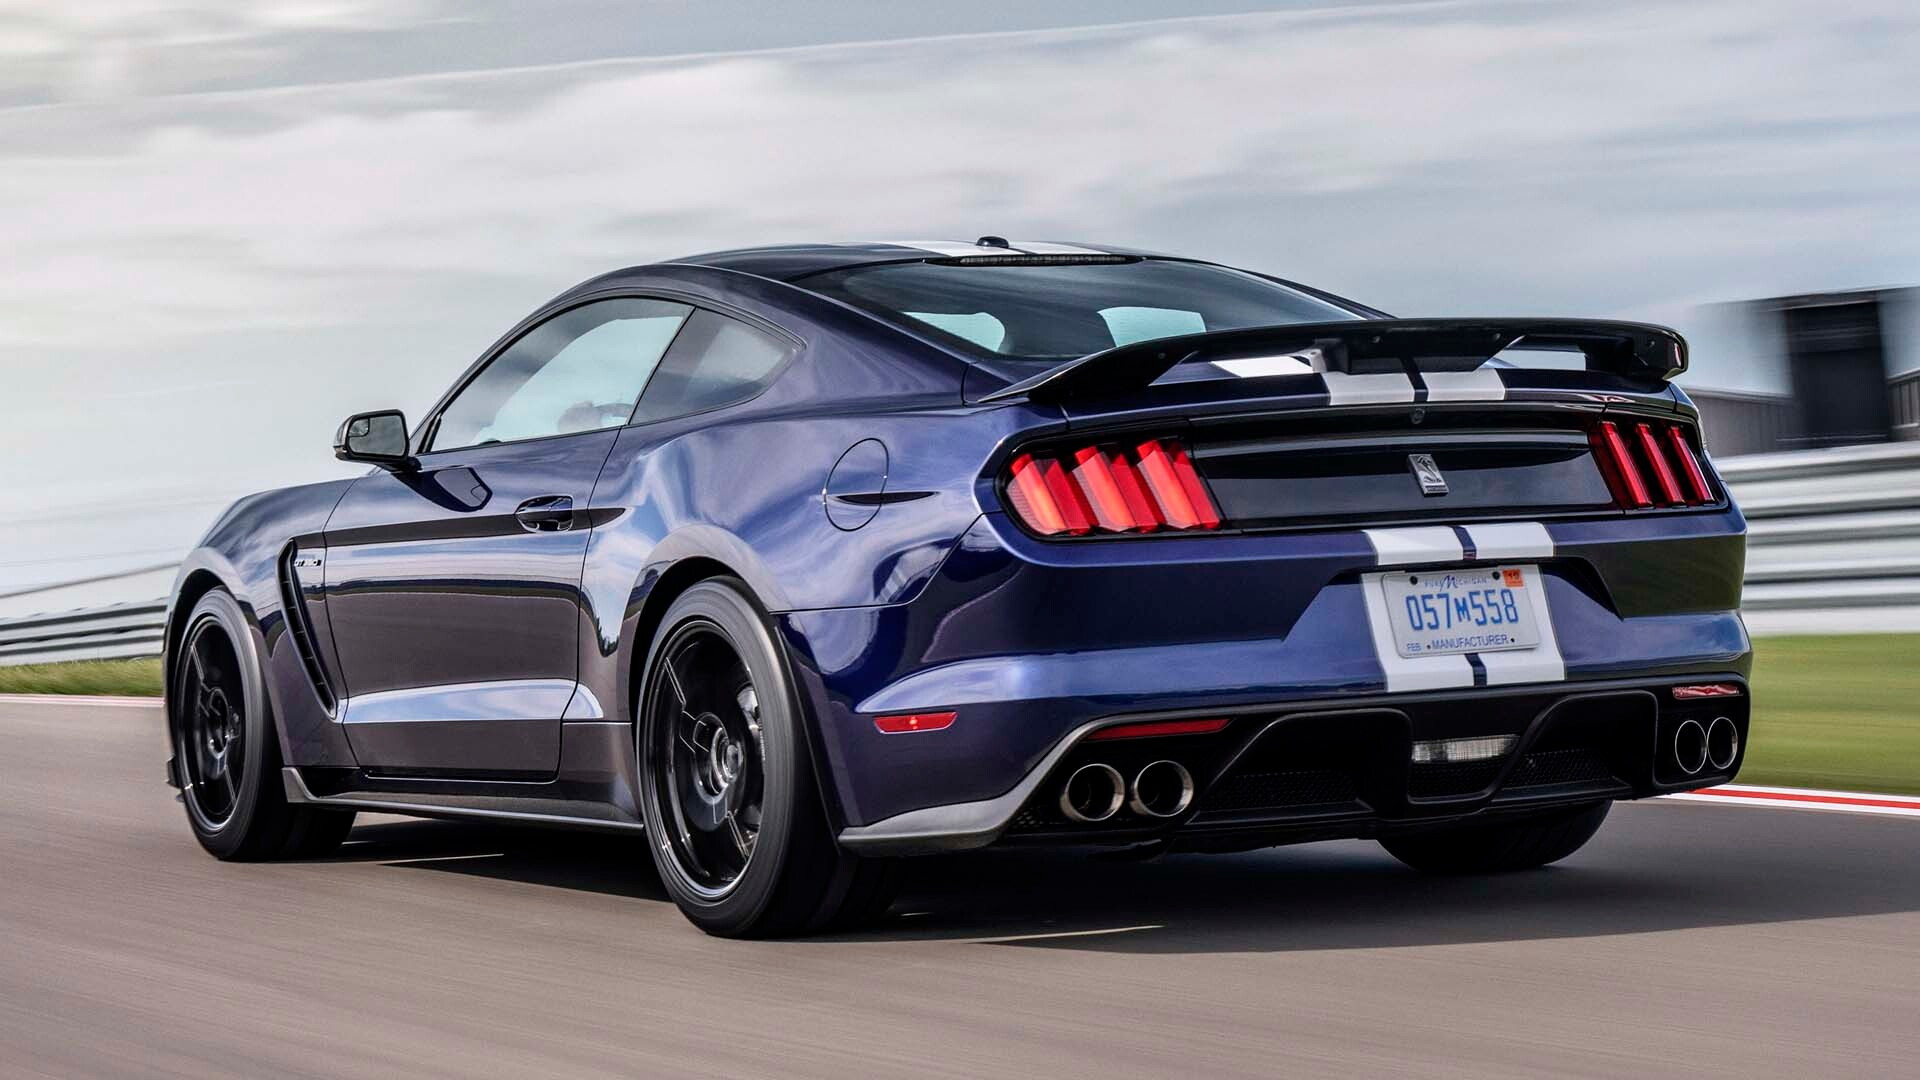 2019 Ford Shelby Mustang GT350